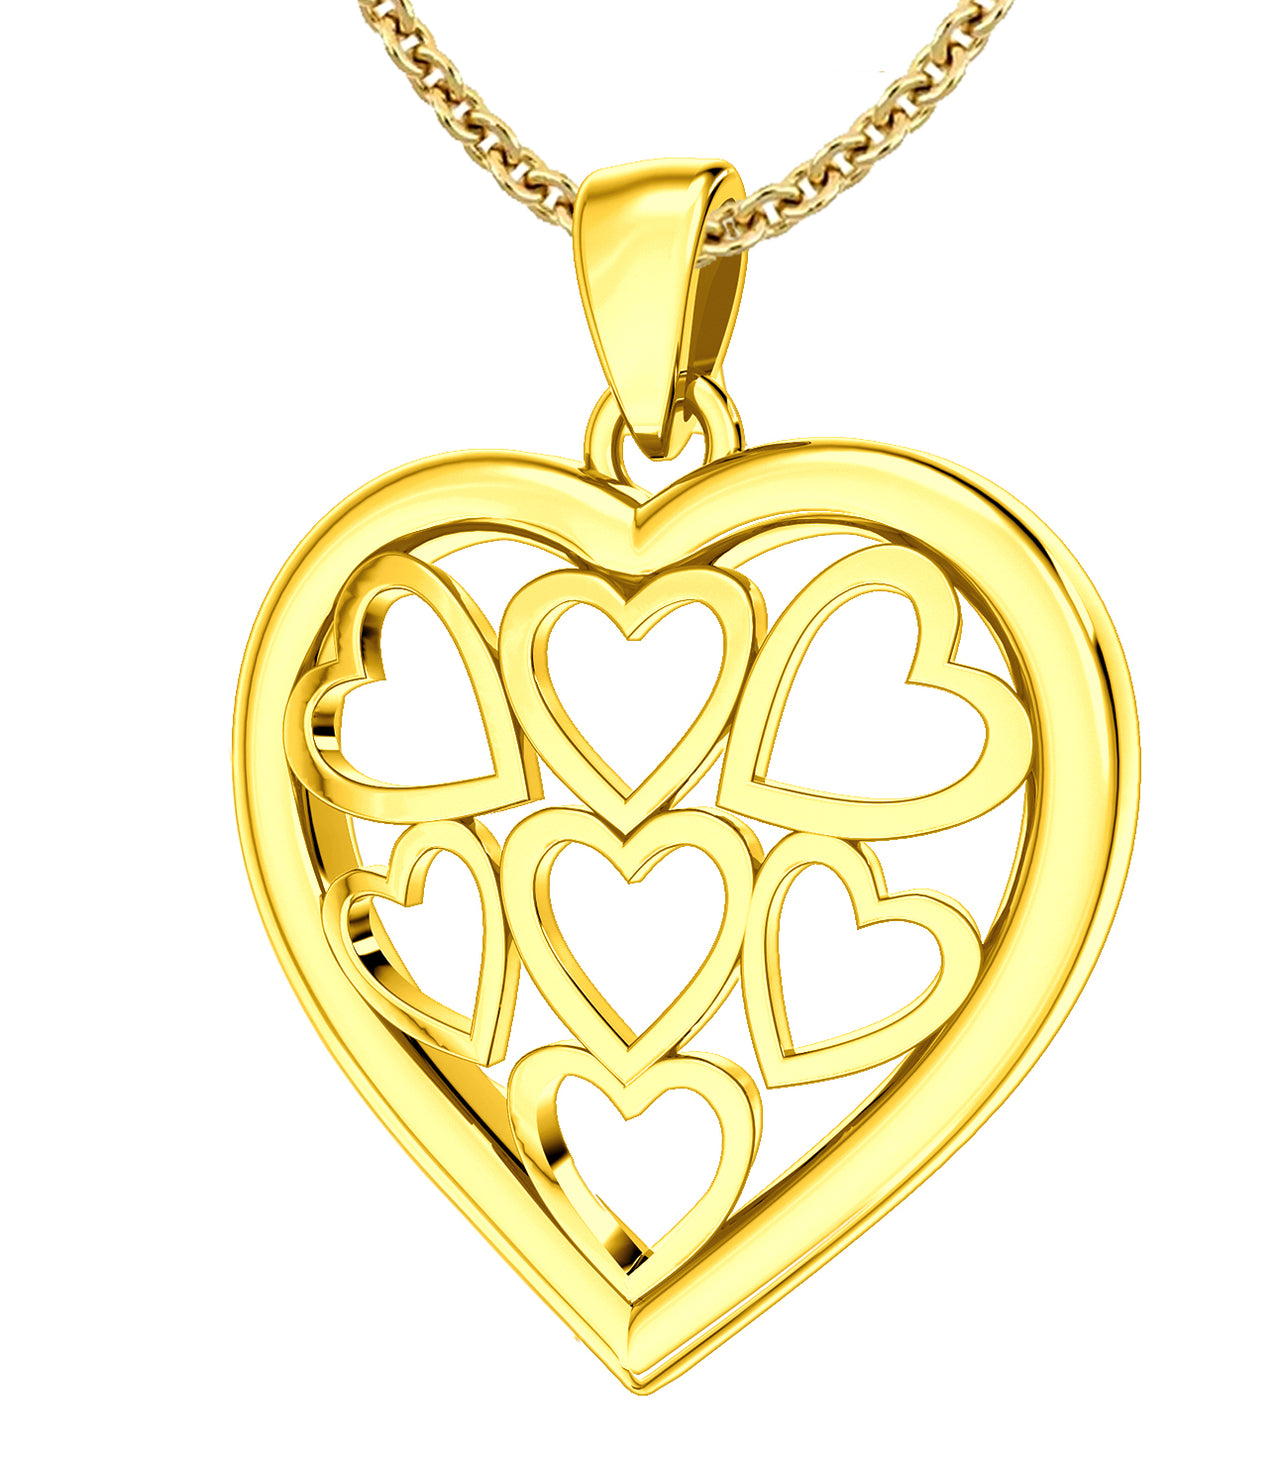 Ladies 14k Gold Heart in Heart Pendant Necklace